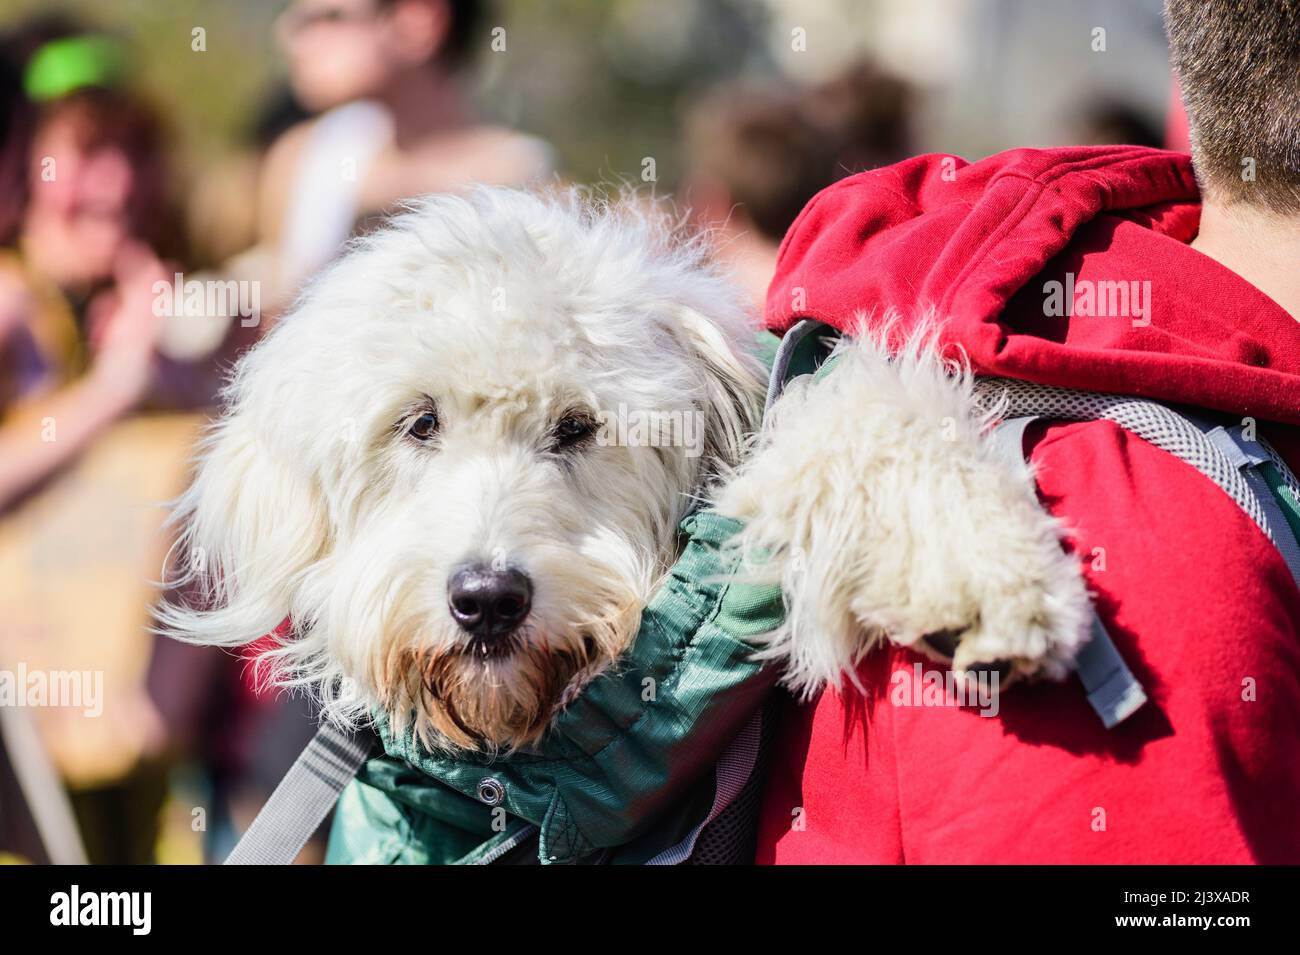 Dog in his master's backpack | Chien dans le sac a dos de son maitre Stock Photo